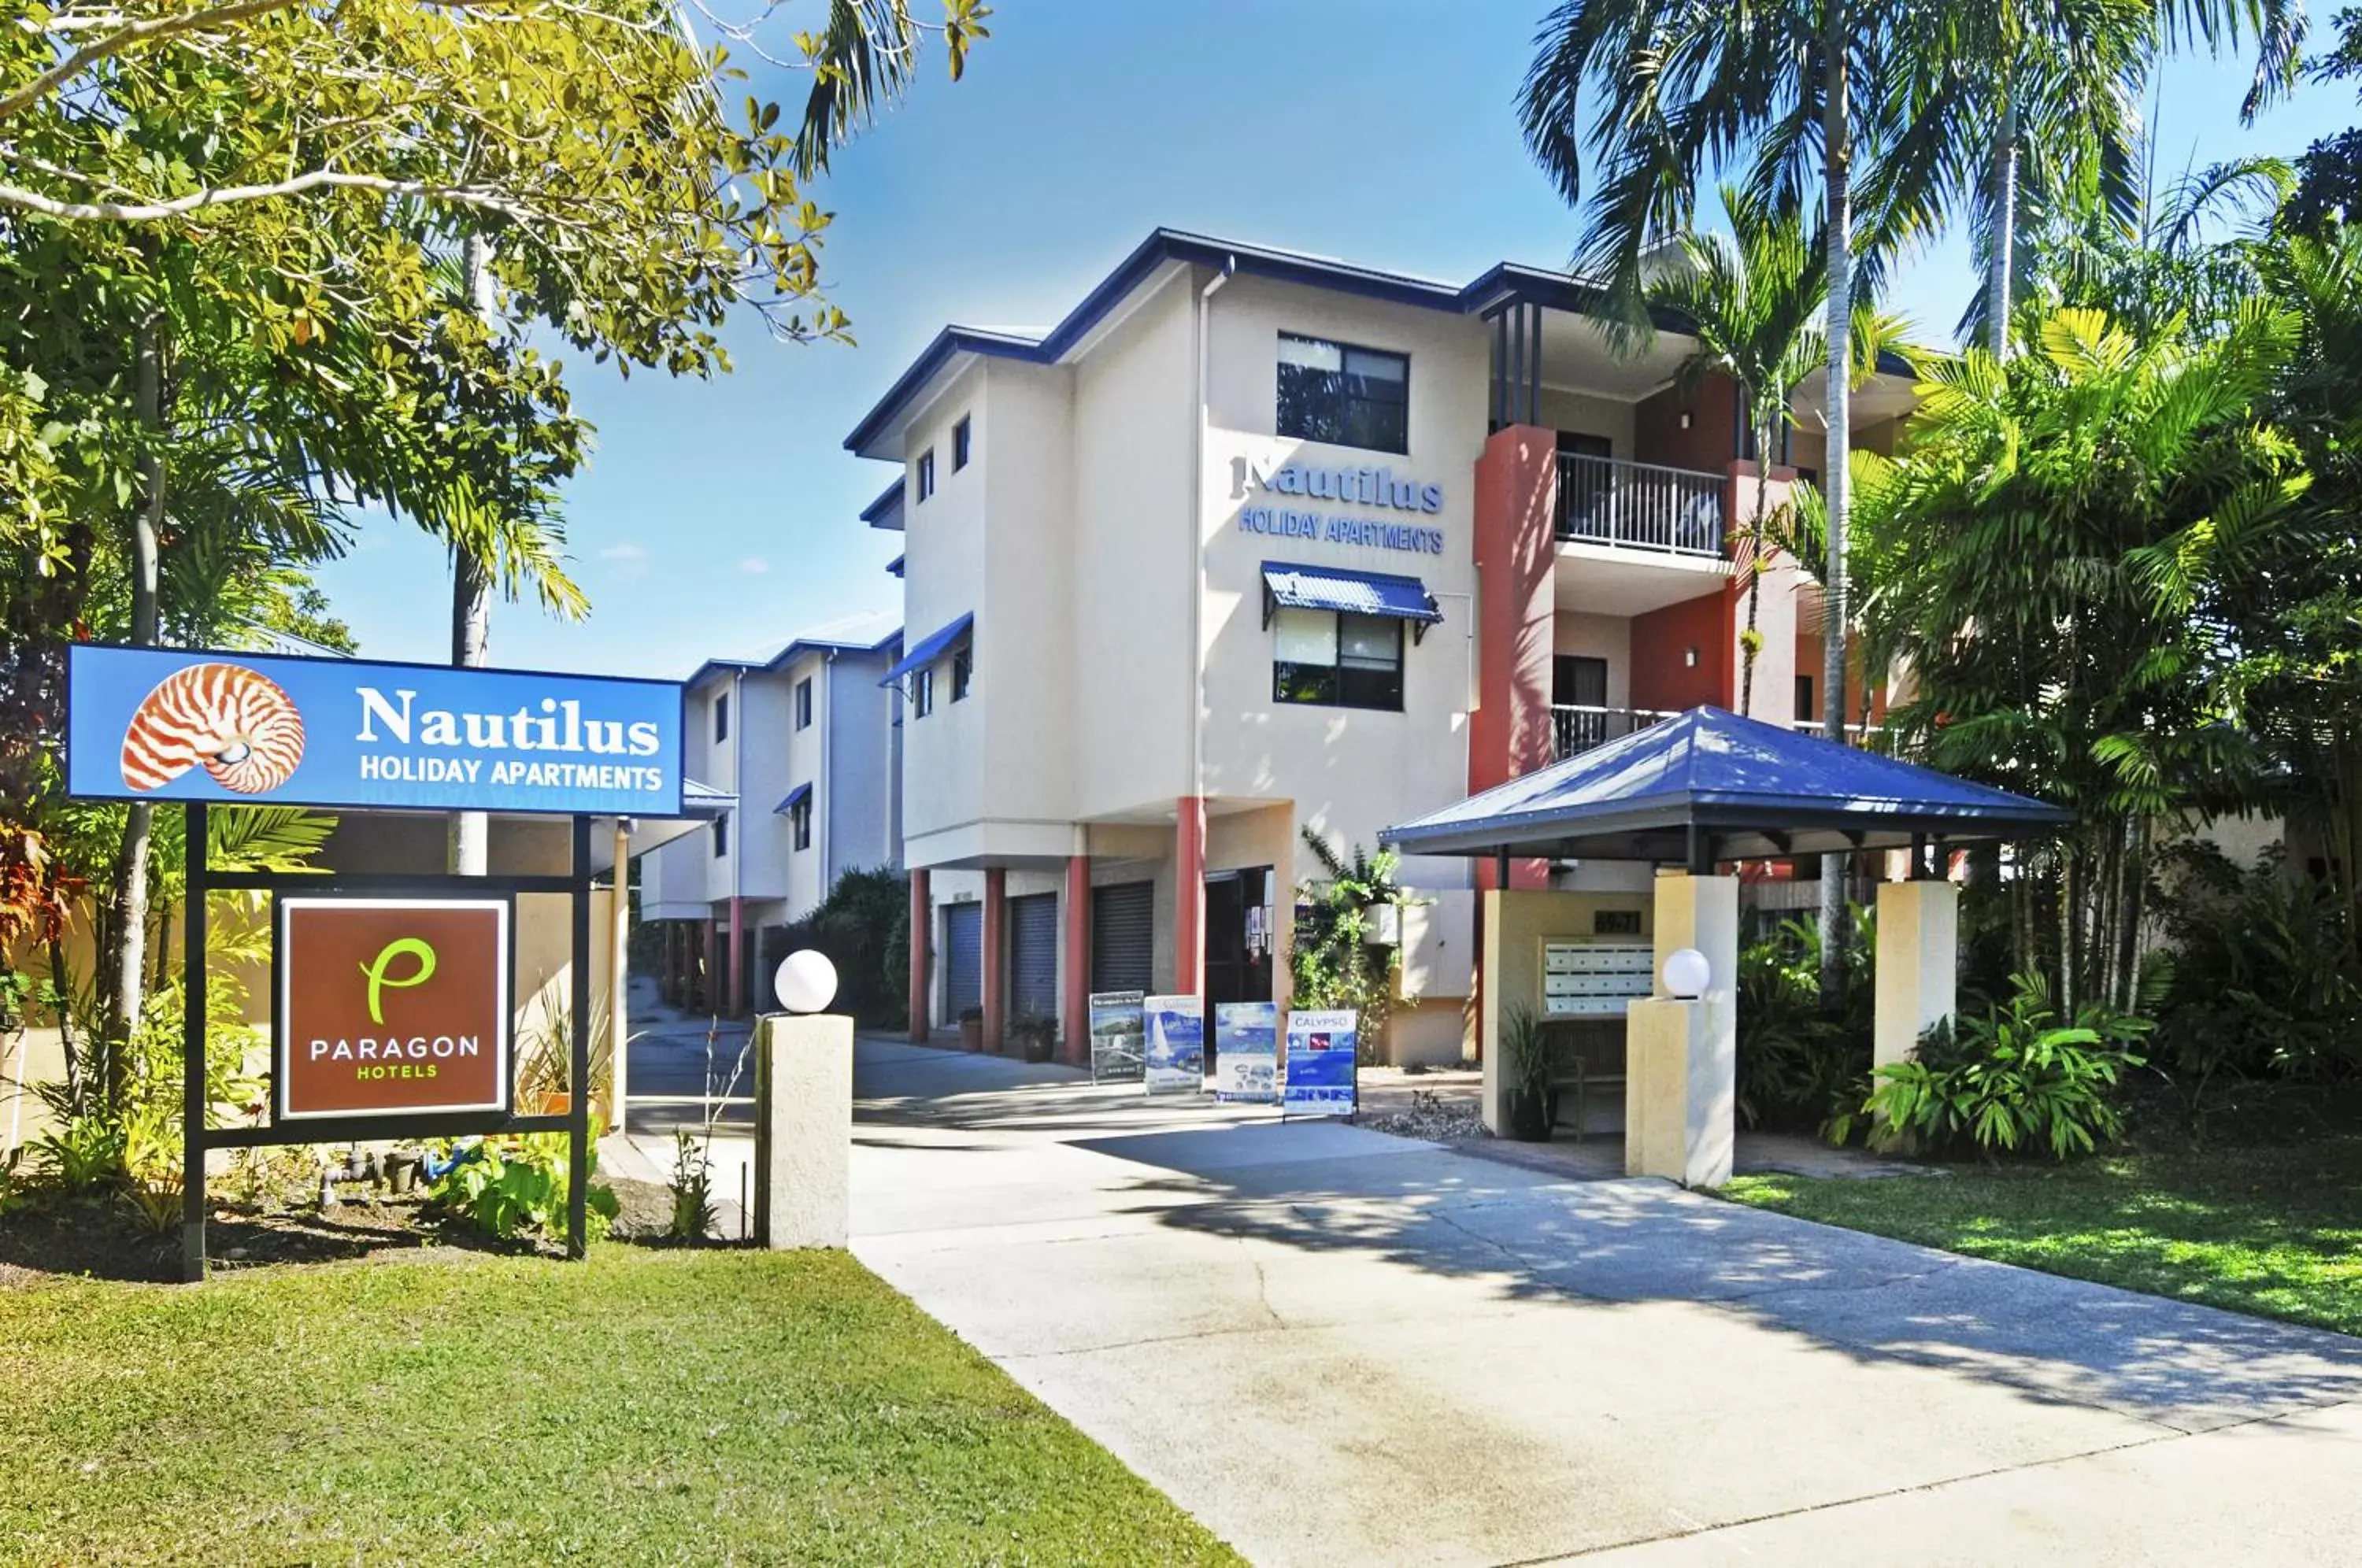 Property Building in Nautilus Holiday Apartments